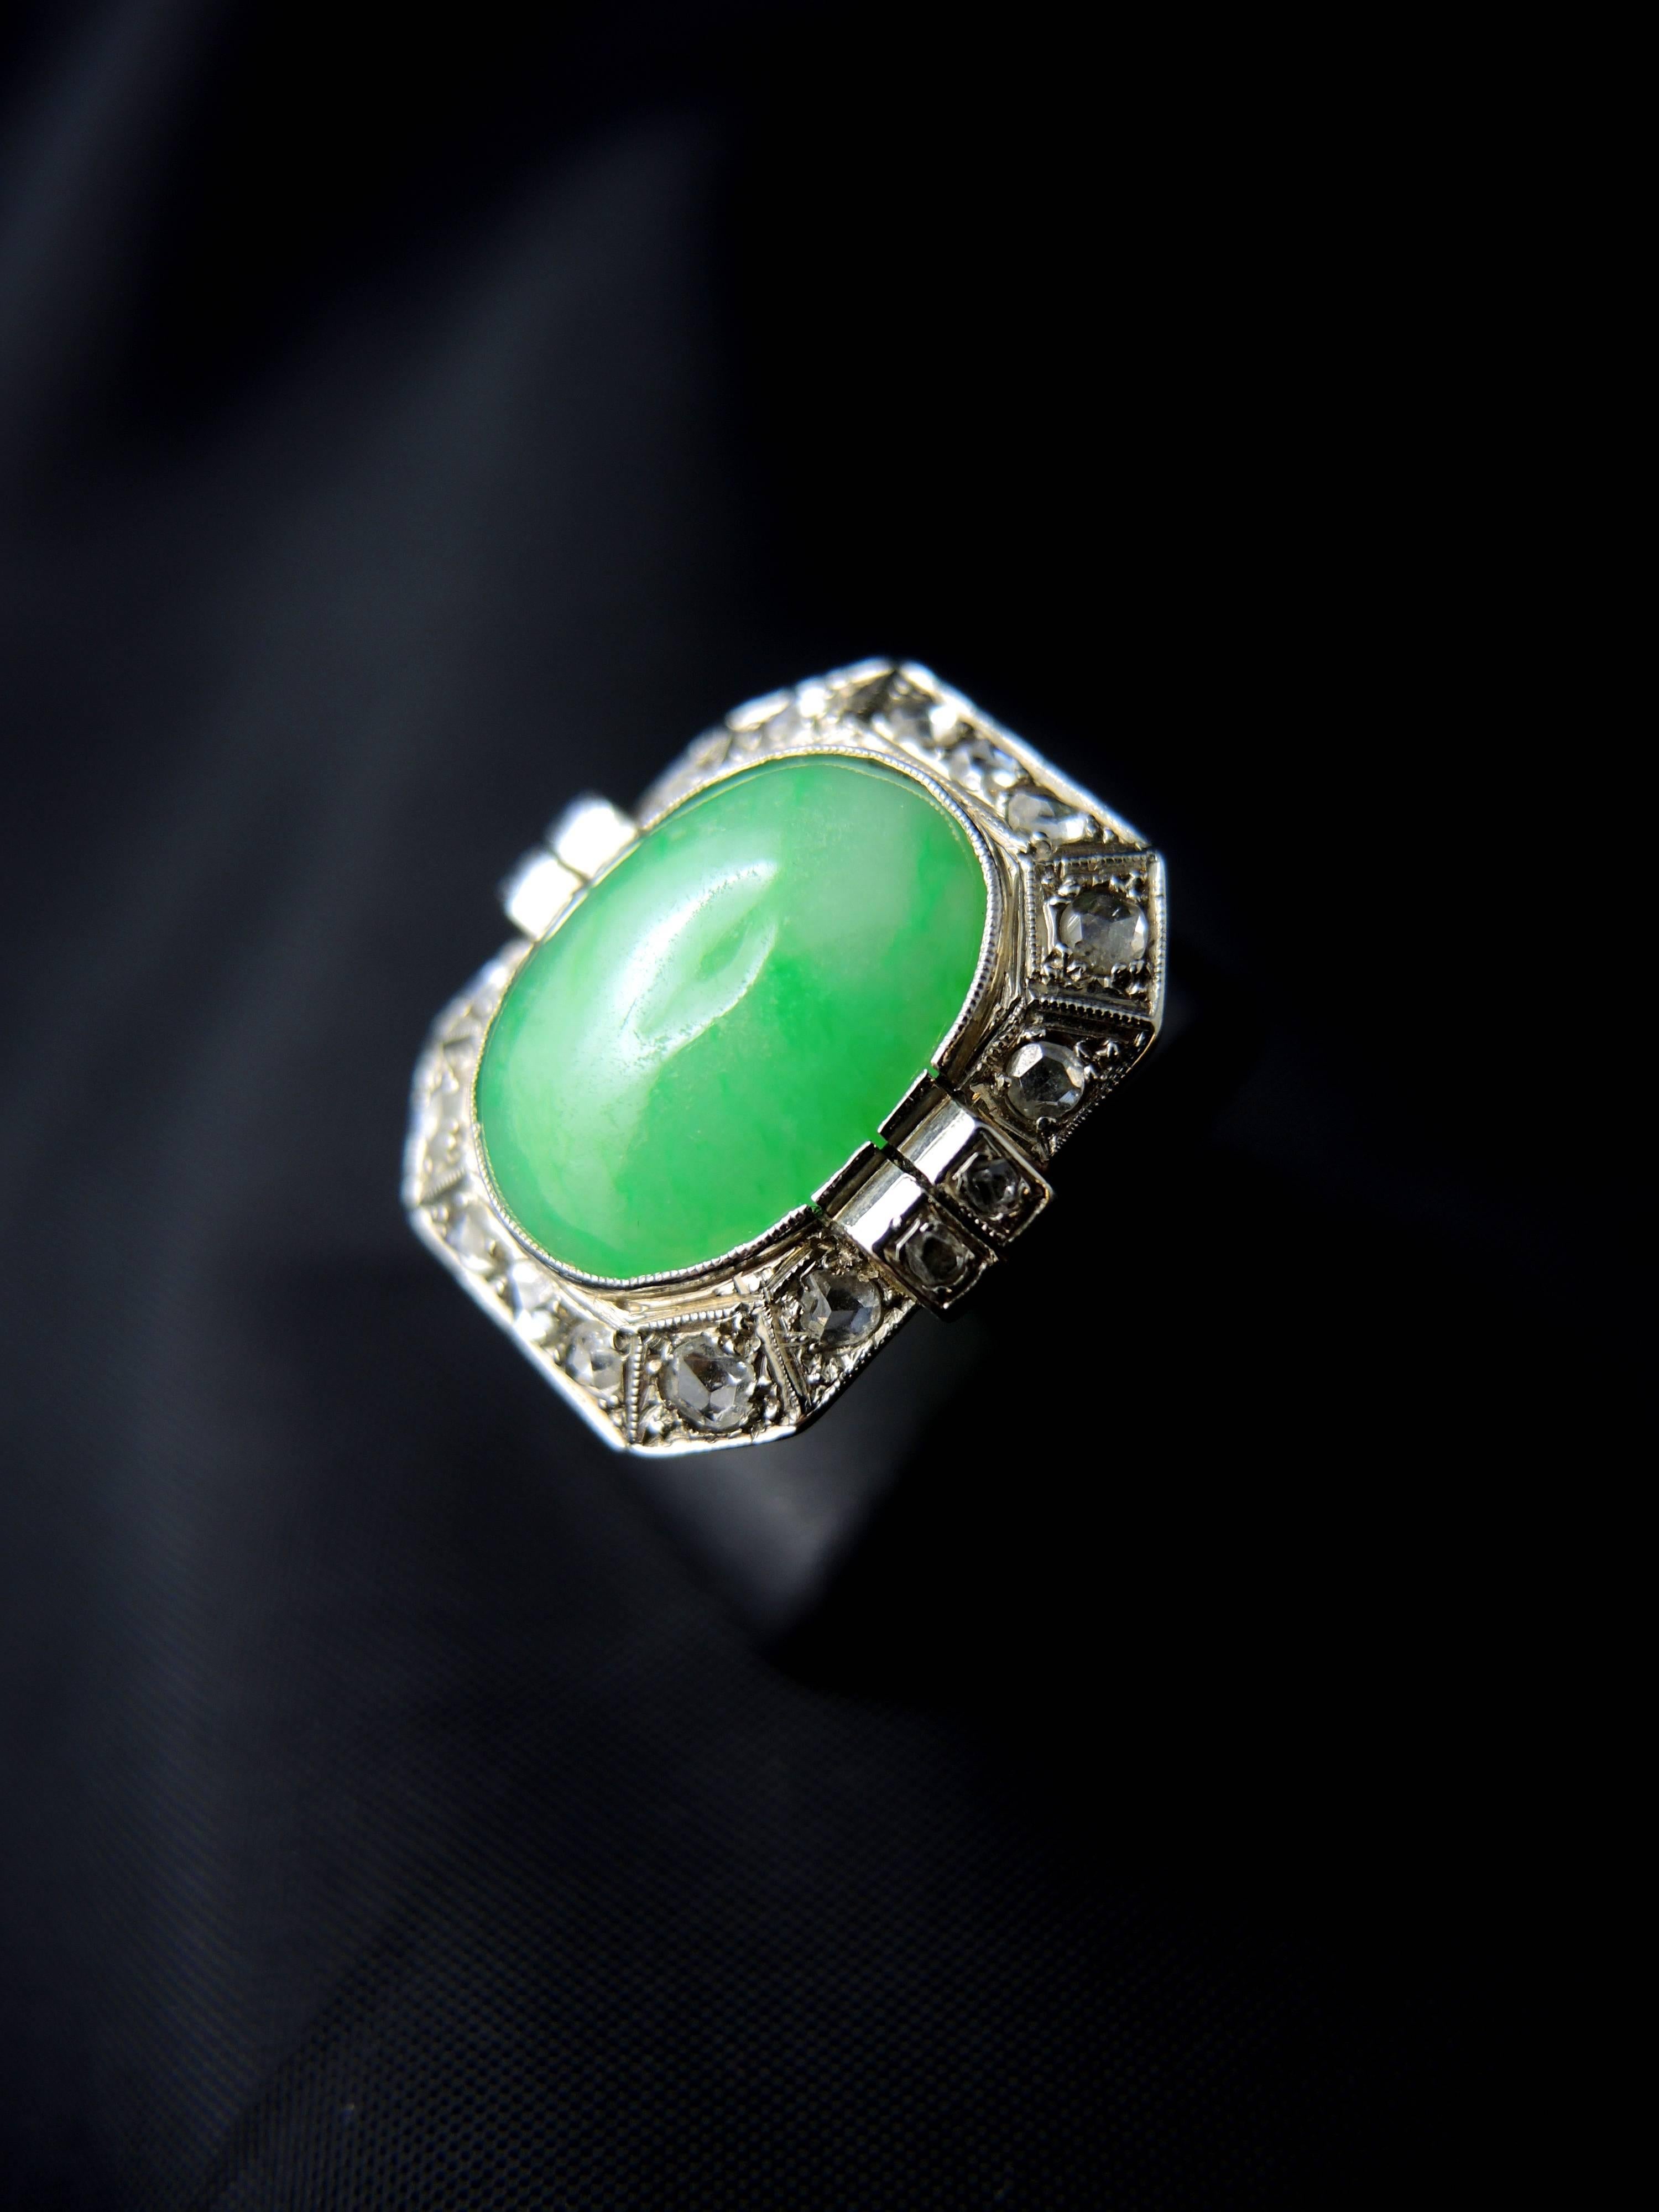 Women's Art Deco French Diamonds and Imperial Jade Ring, circa 1930